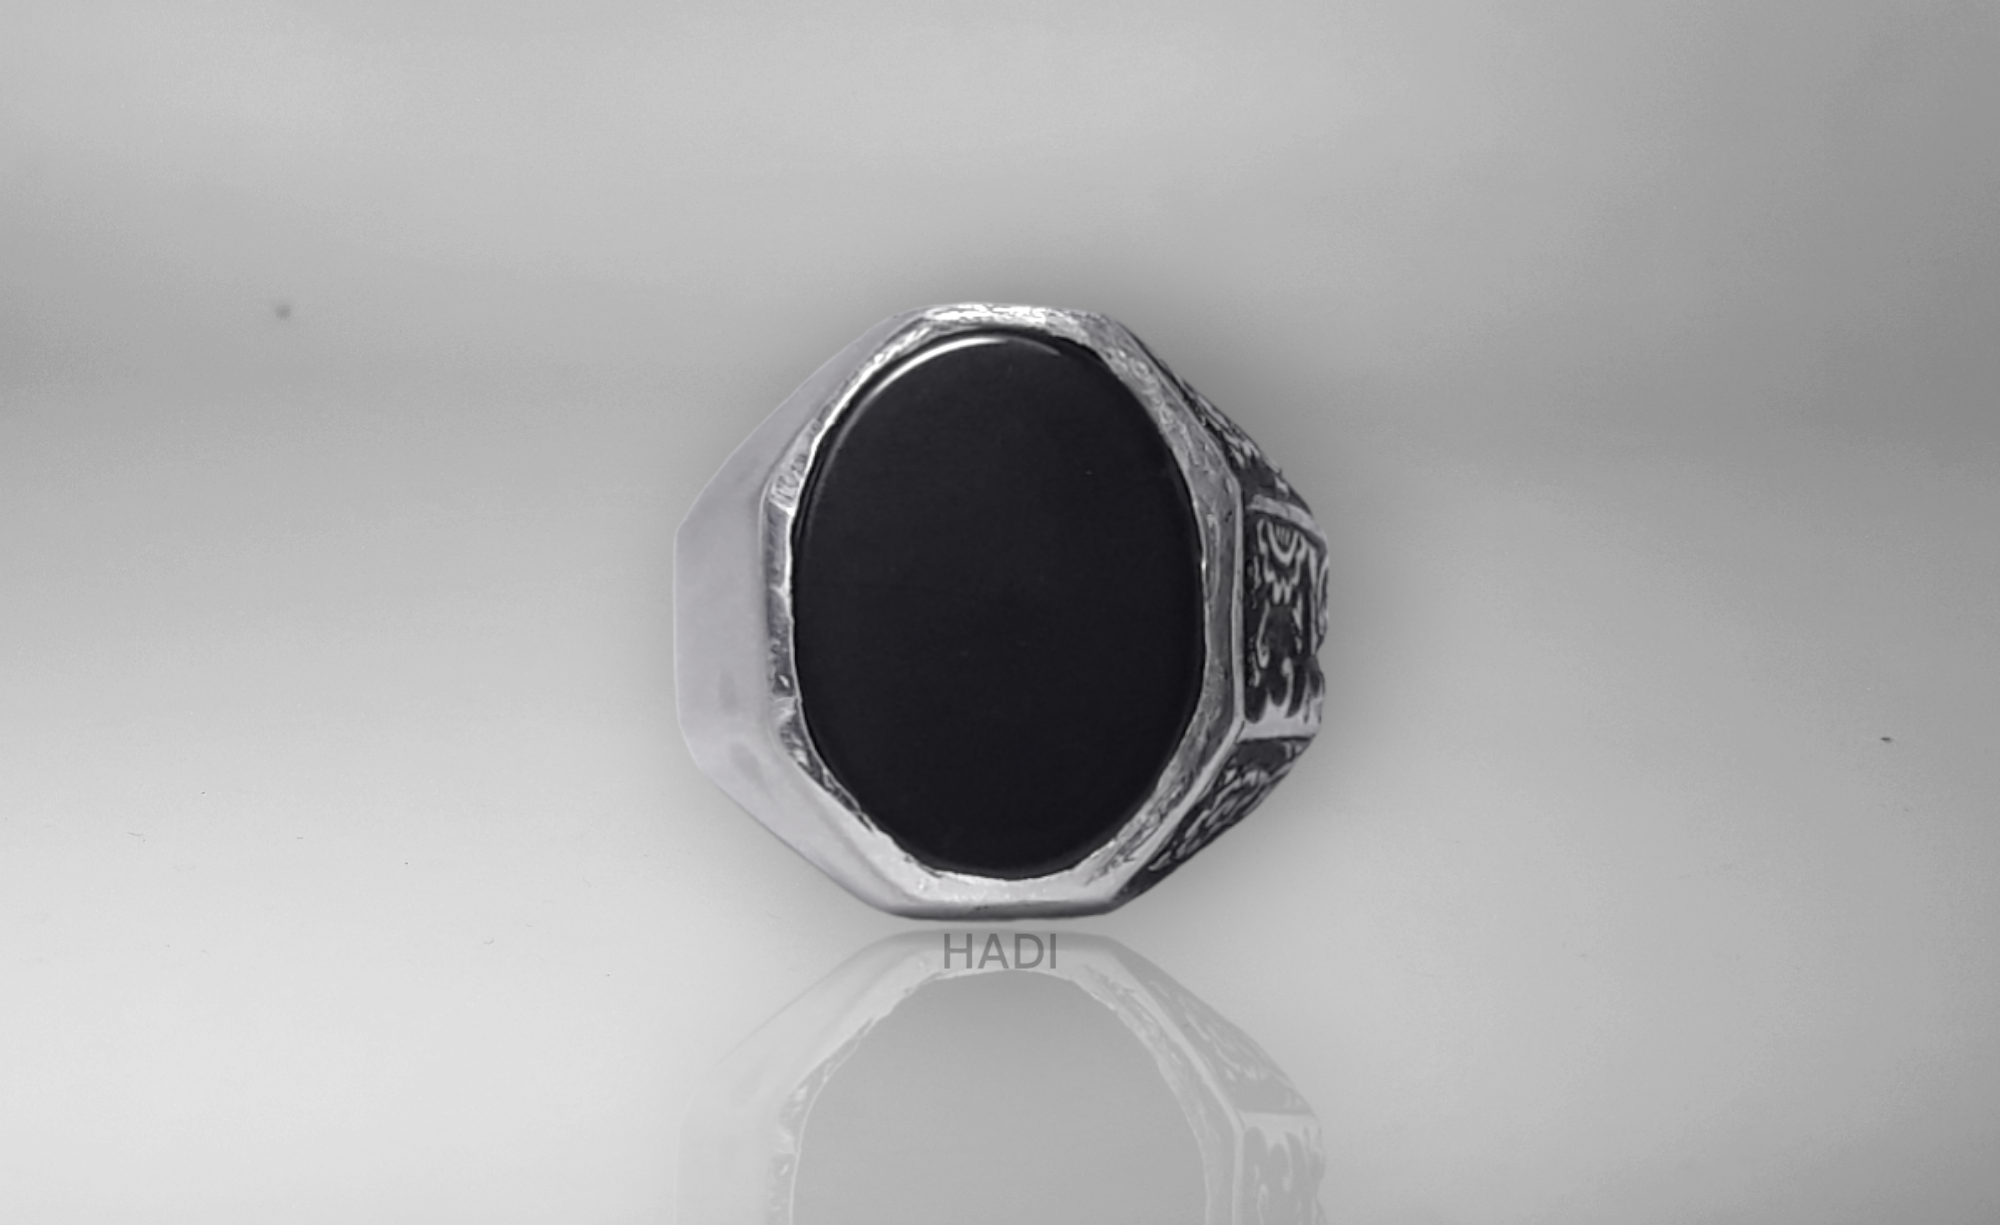 Men Signet Rings - Elegant Sterling Silver Ring in Black Onyx - One Side Plain One Side Engraved- 14k White-Gold Plated with Matte and Shiny Finishing